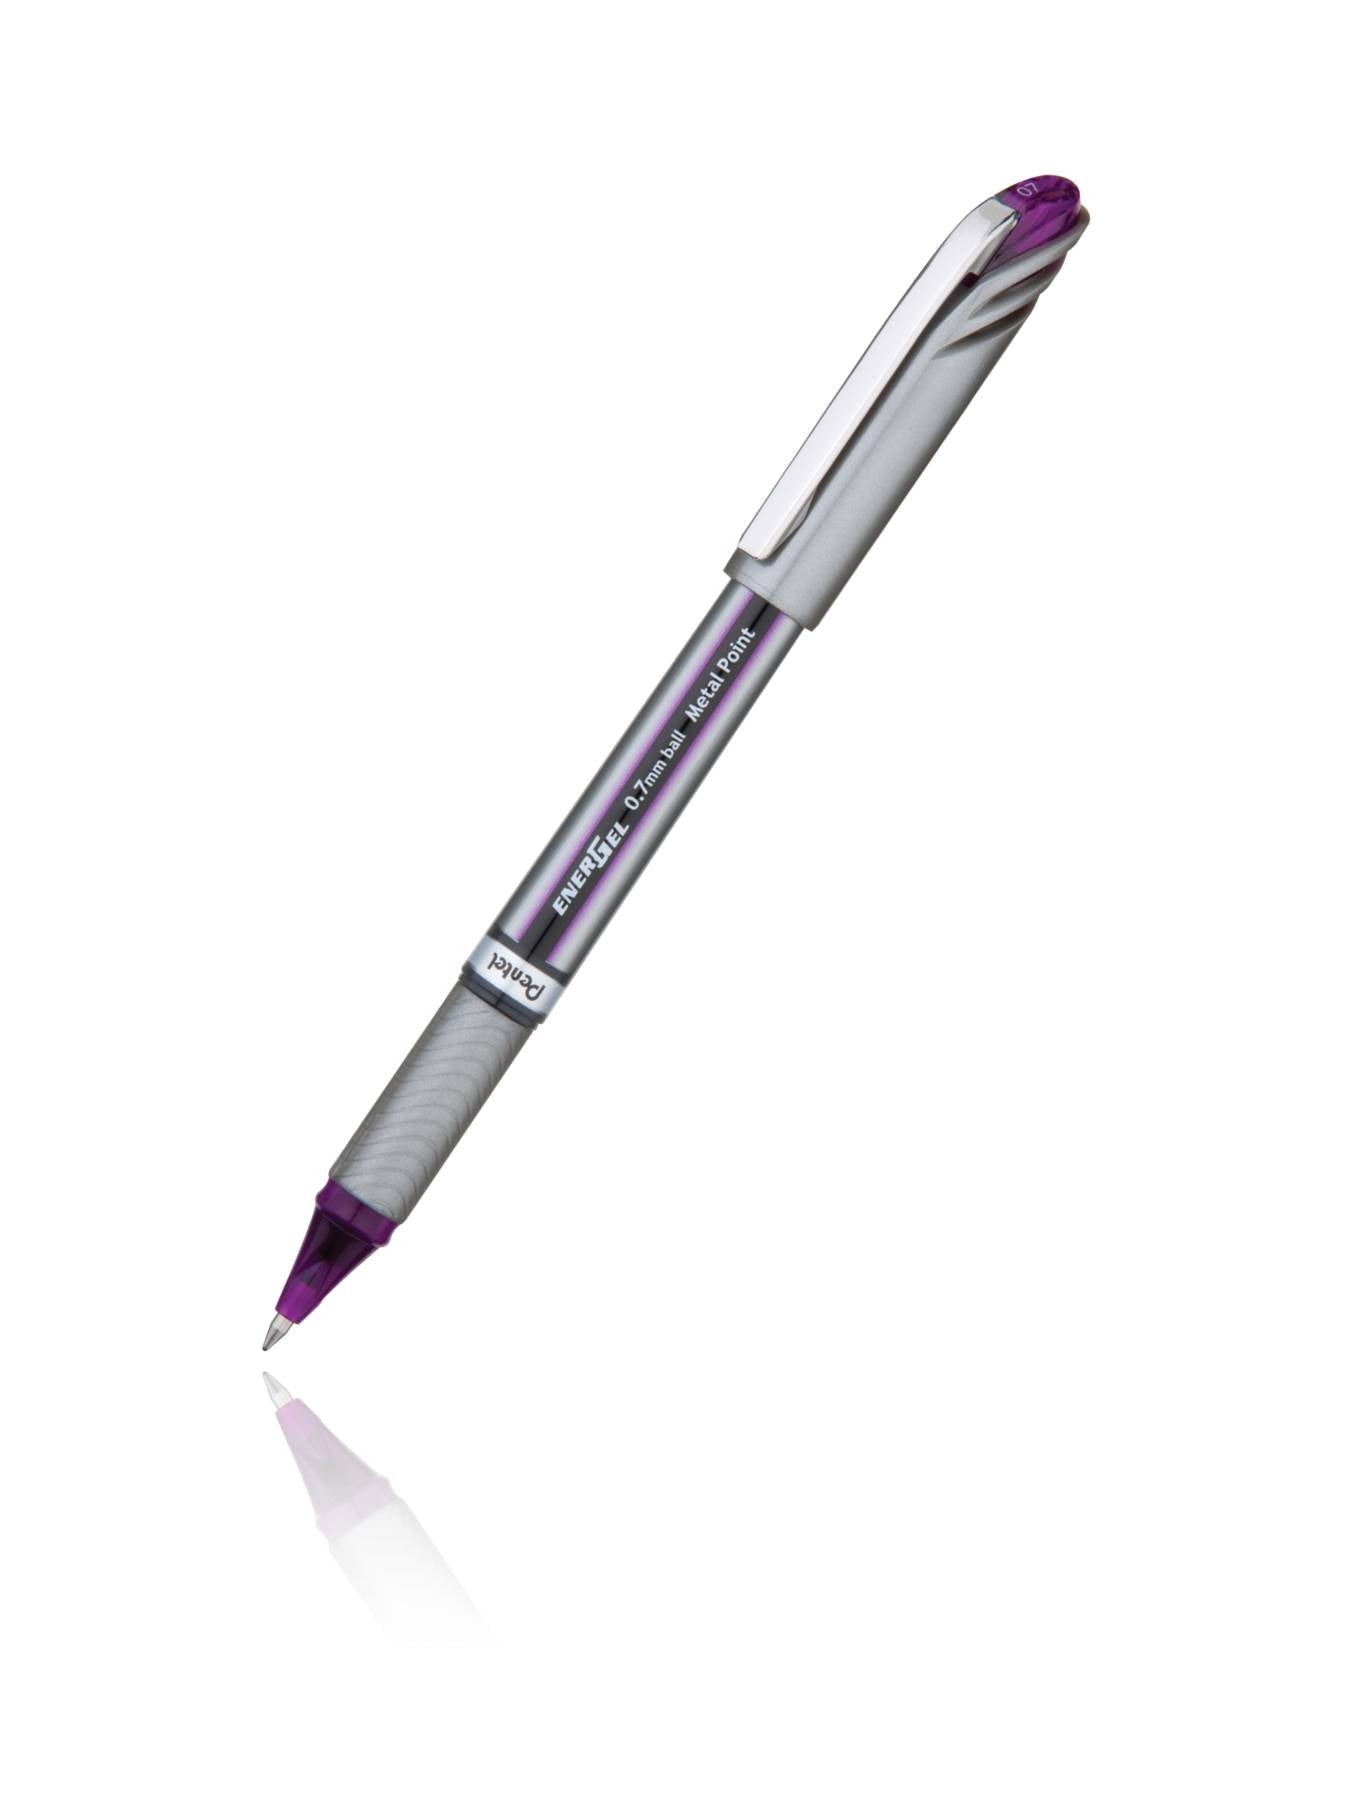 Pentel BL27-A, BL27-B, BL27-C, BL27-D, BL27-V EnerGel NV Liquid Gel Pe –  Value Products Global